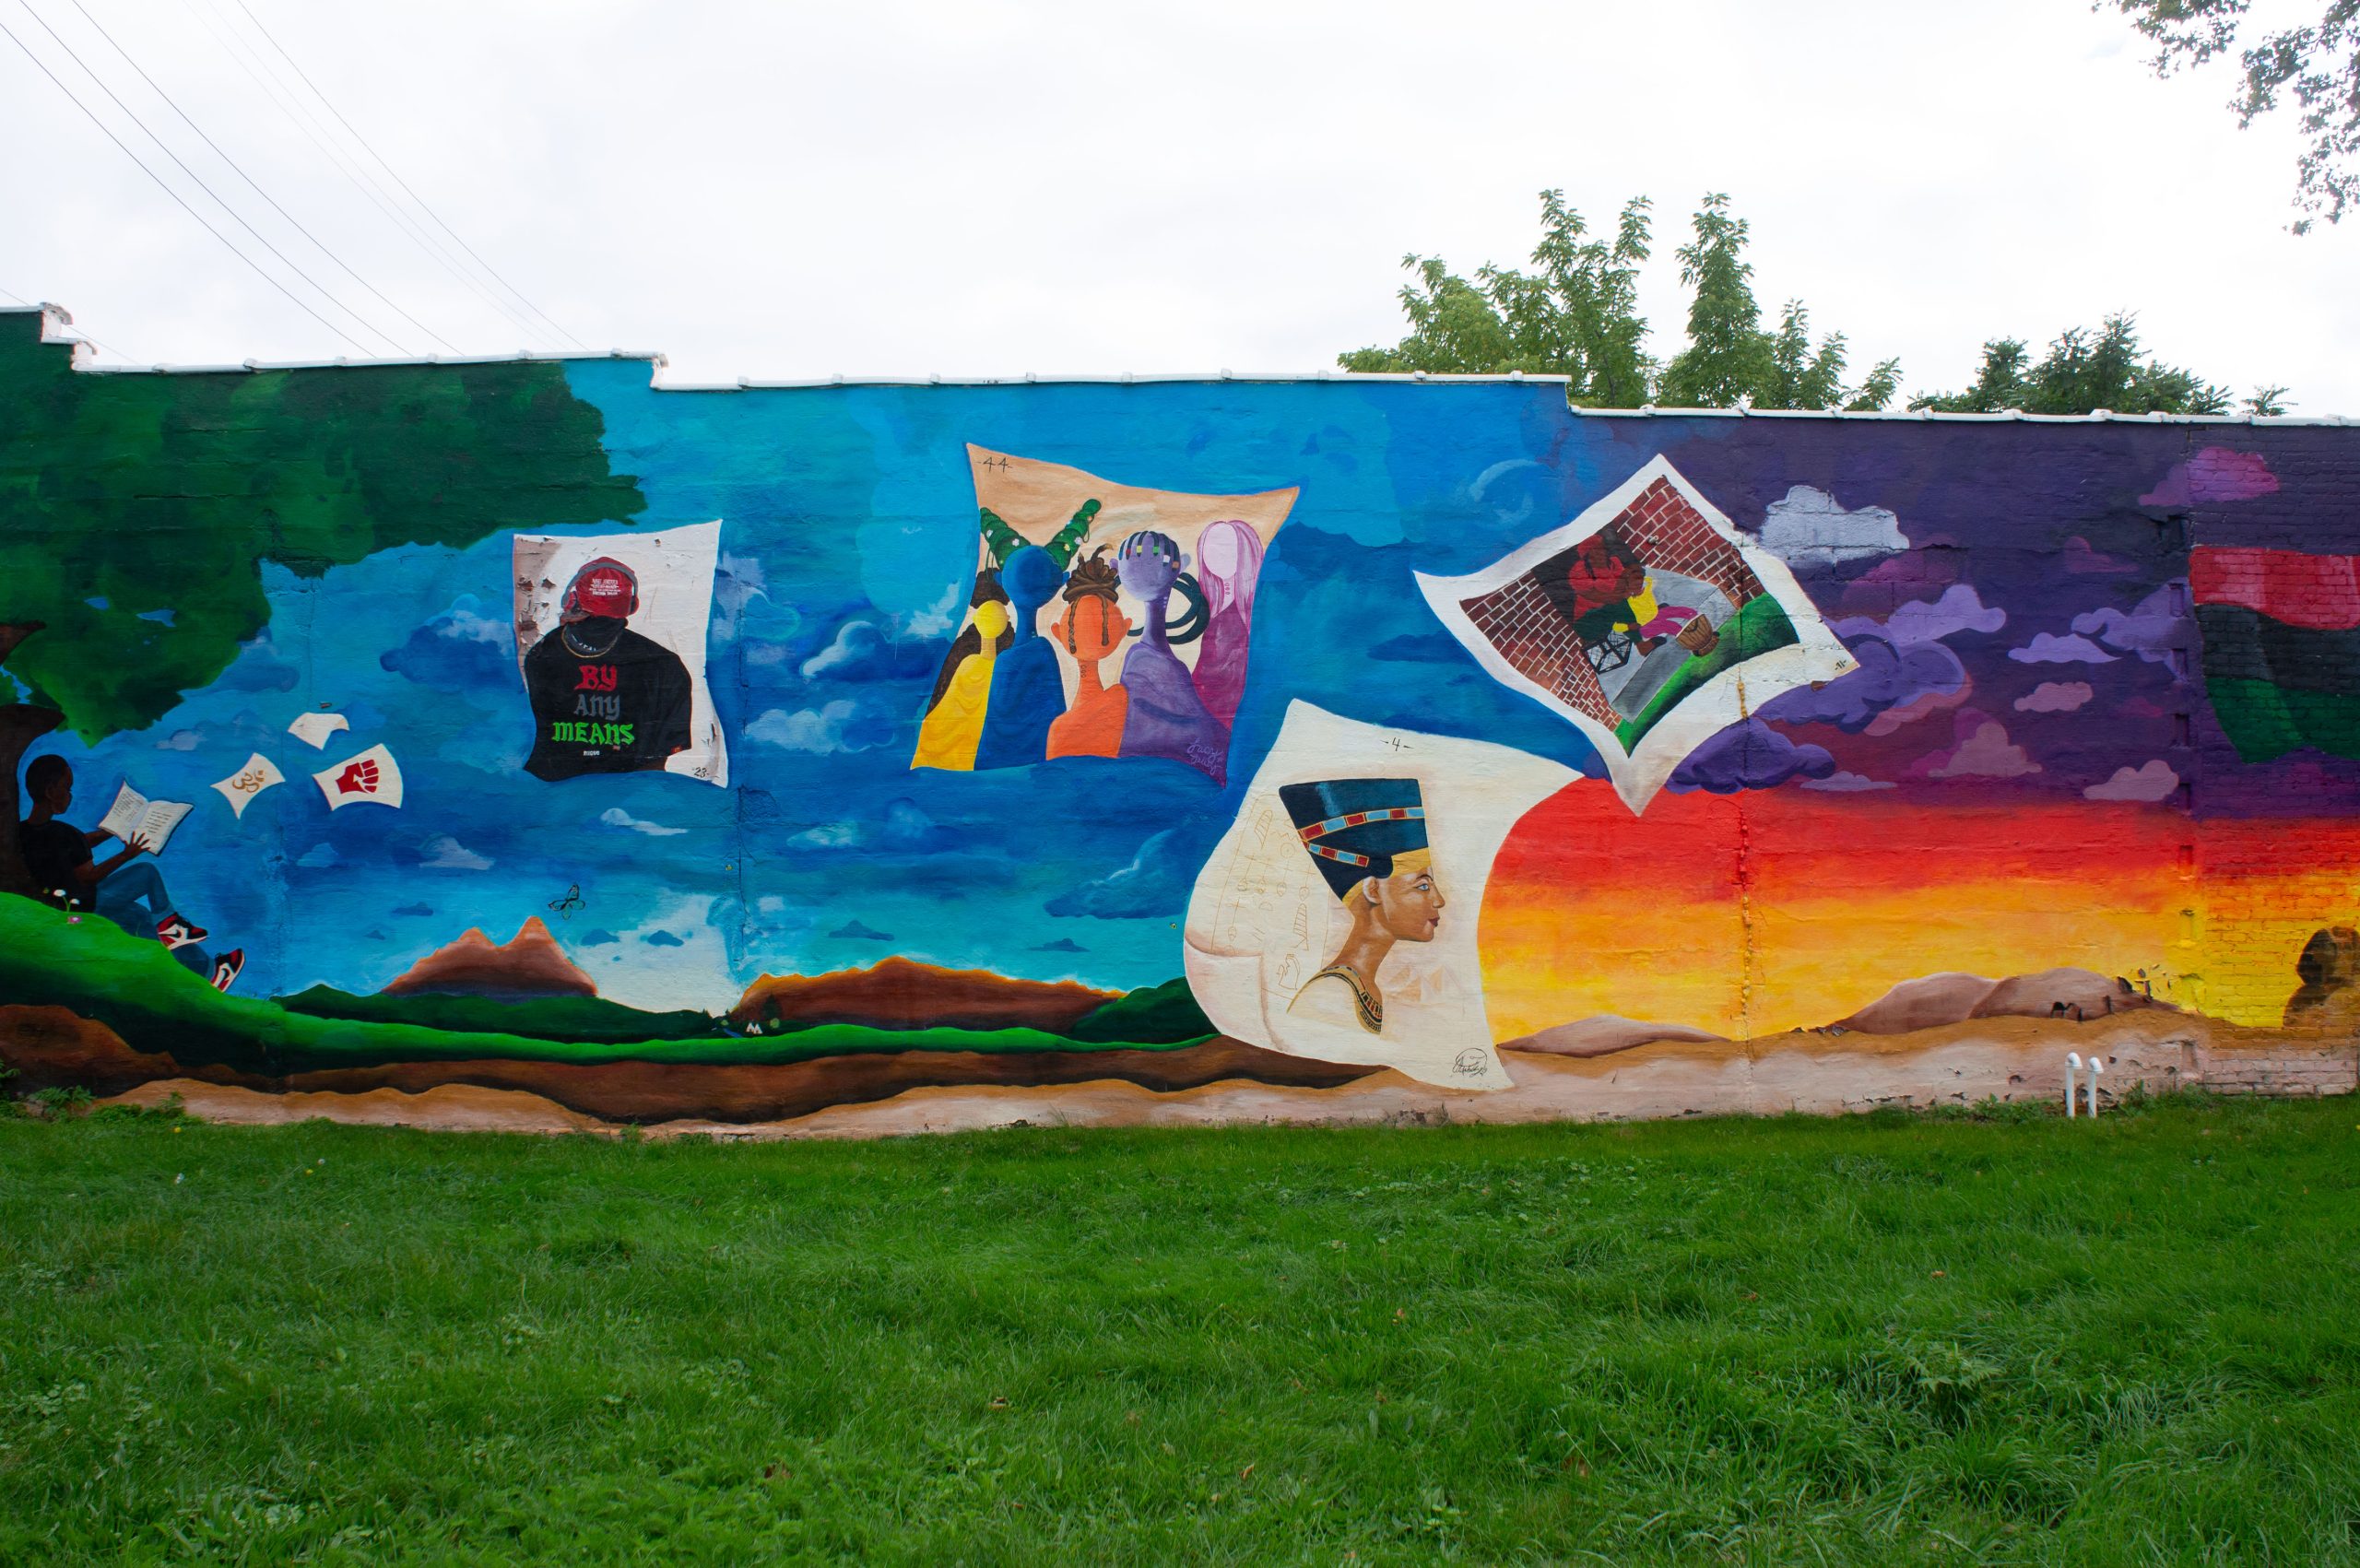 A mural in the Waterloo Arts District, North Collinwood